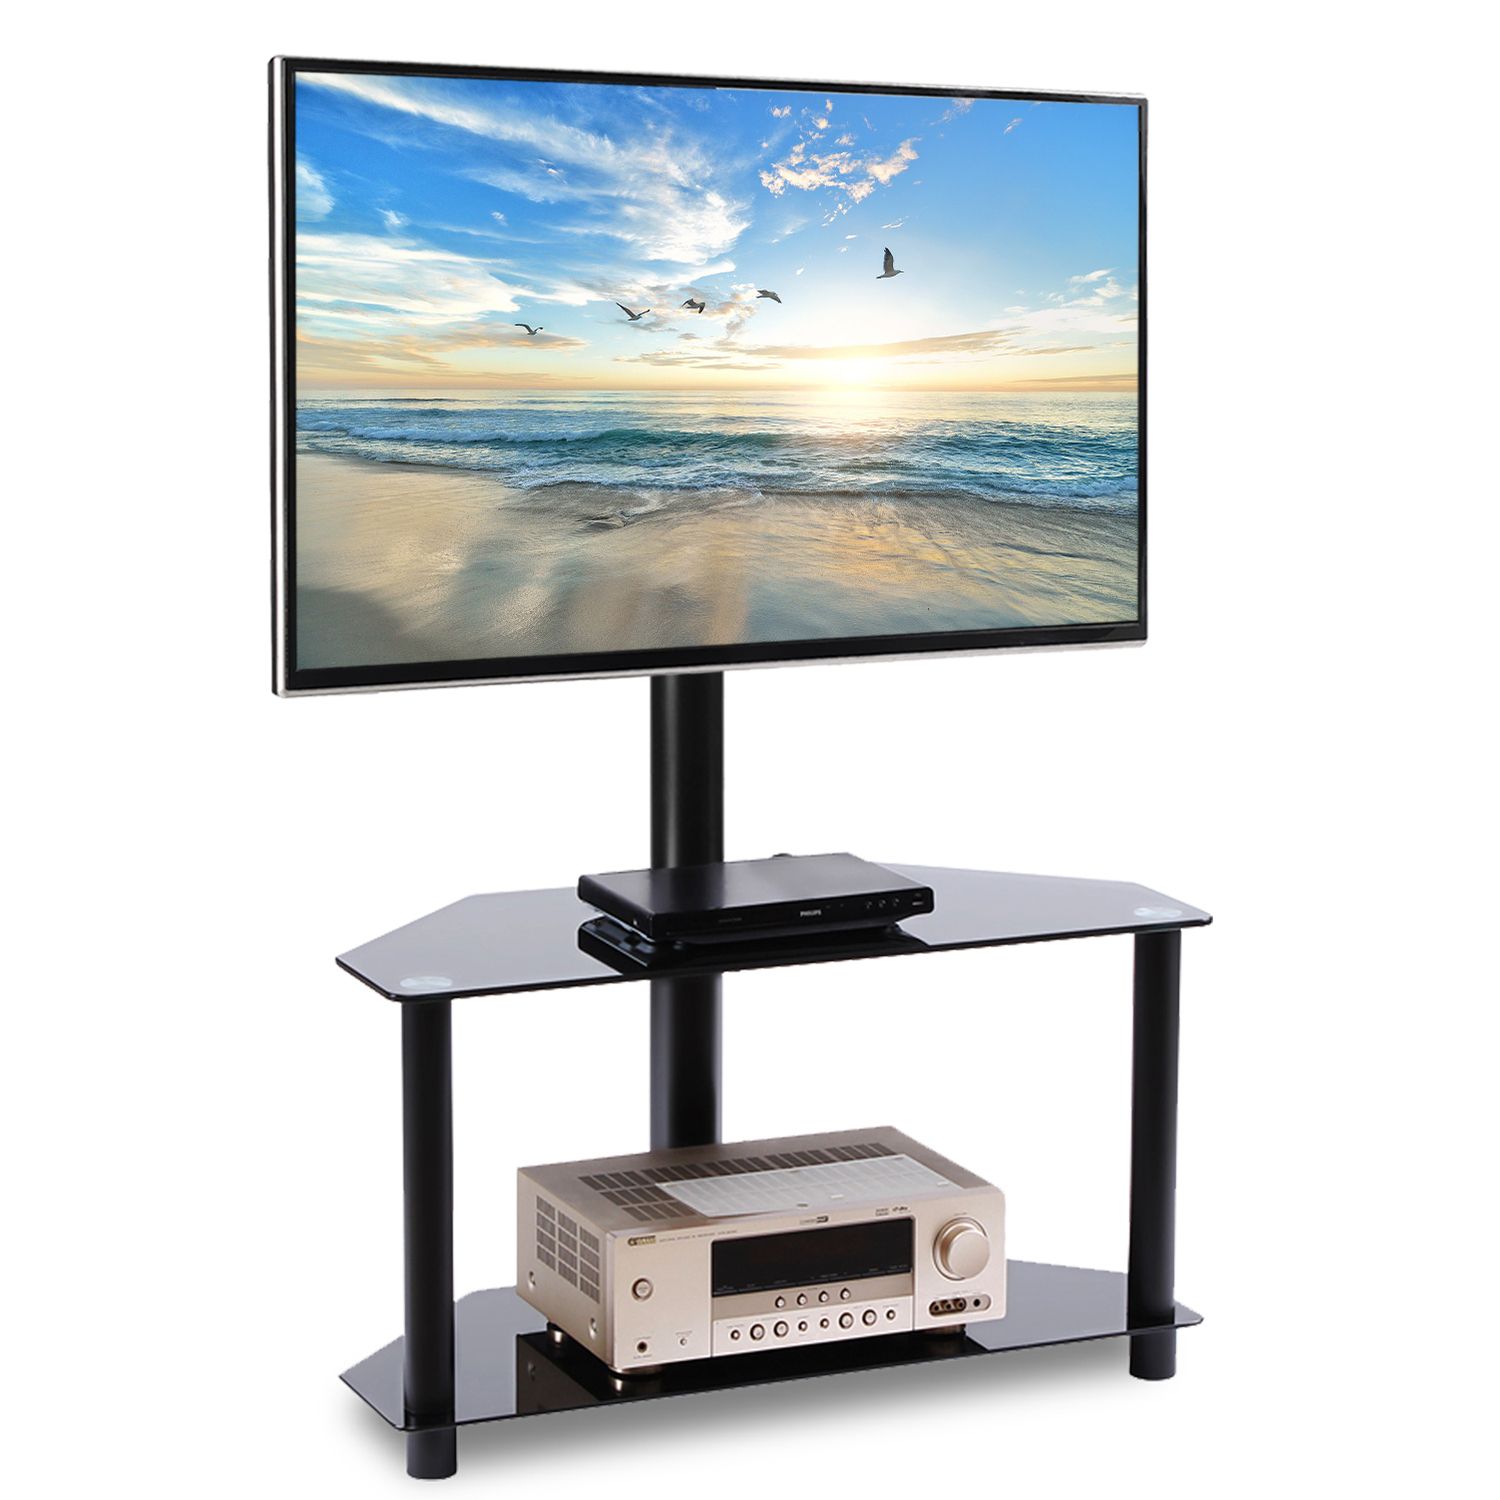 Swivel Corner Black Glass Tv Stand With Mount For 32 To 55 For Corner Tv Stands 46 Inch Flat Screen (View 7 of 15)